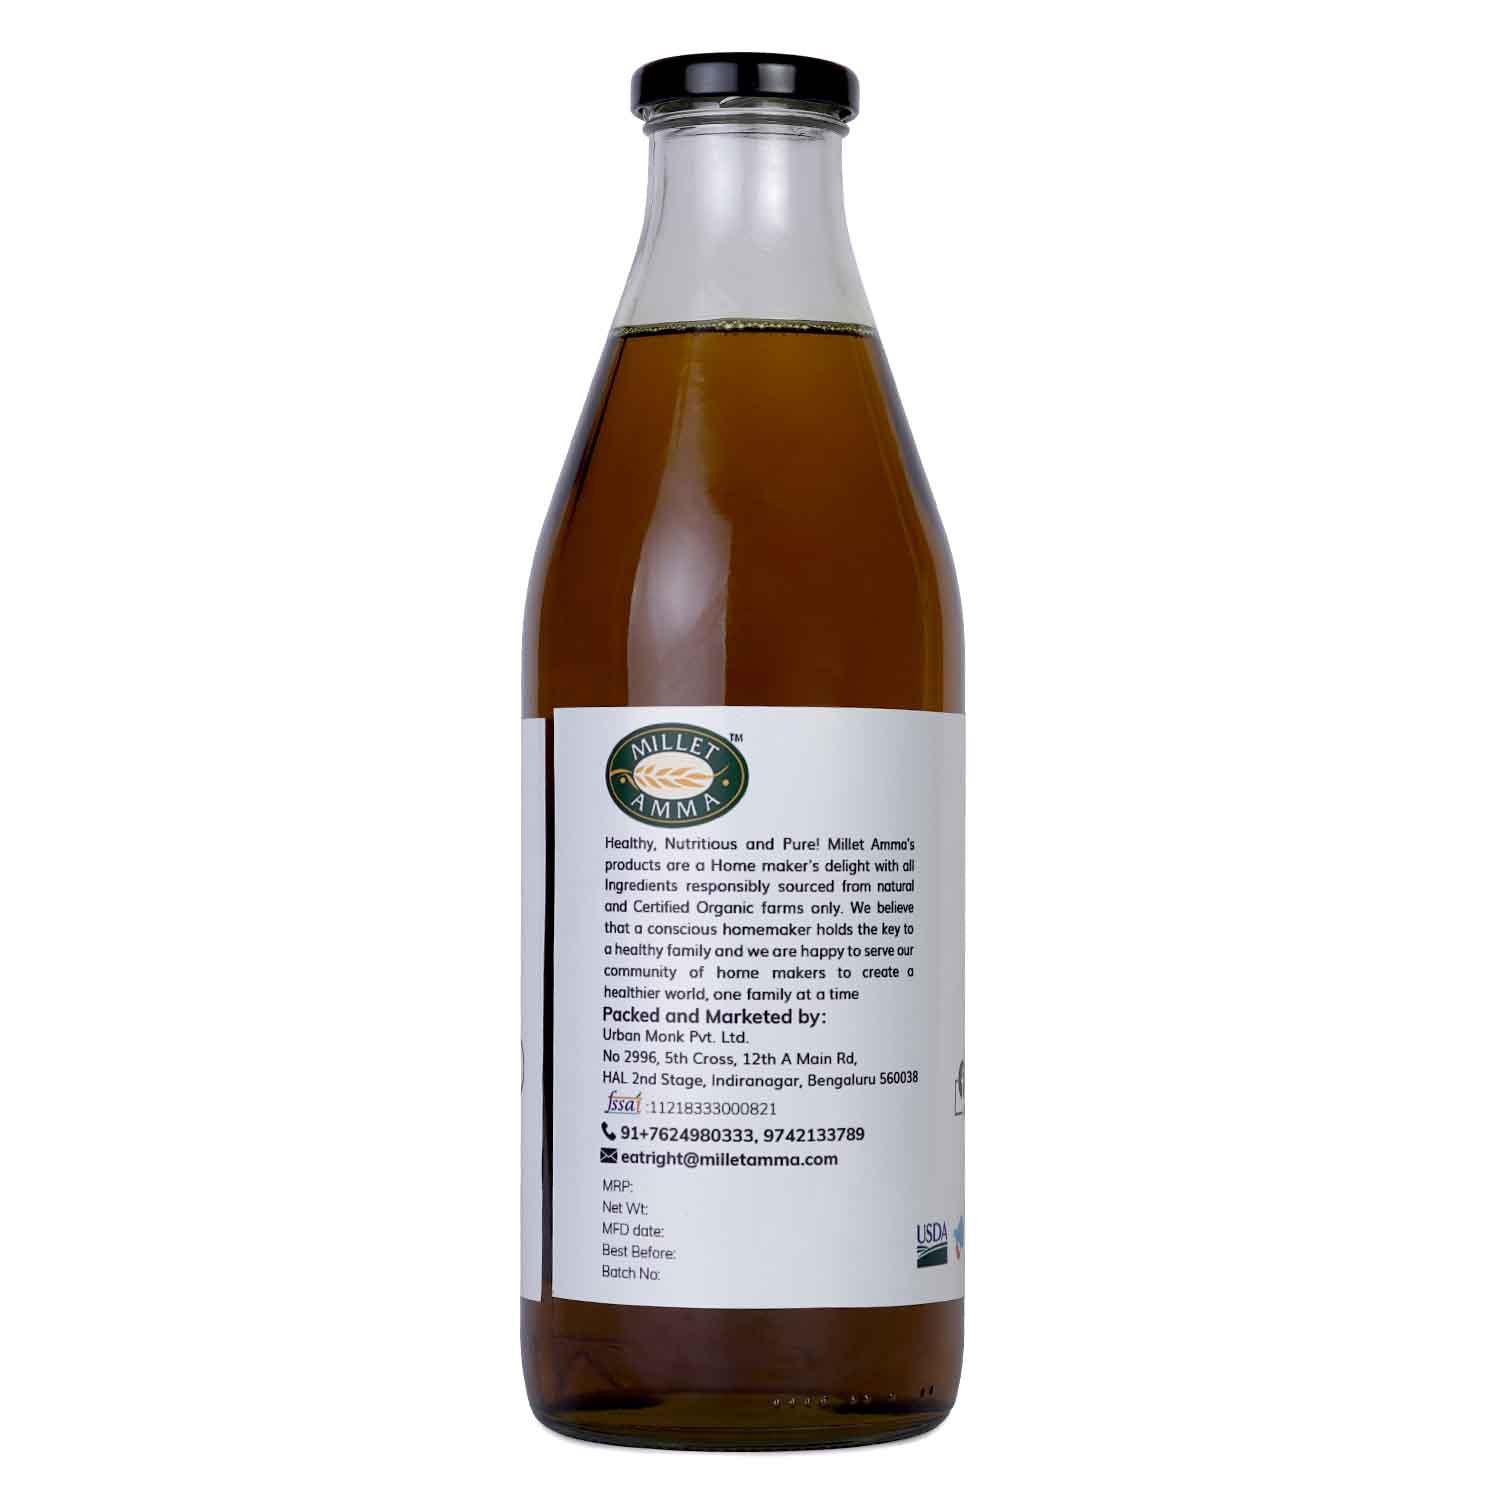 Milletamma’s cold pressed mustard oil is obtained from natural mustard seed.  It acts as an antifungal agent.  It helps to boost digestion and stimulate the secretion of gastric juice.  It helps to protect skin from UV light and detoxification of skin.